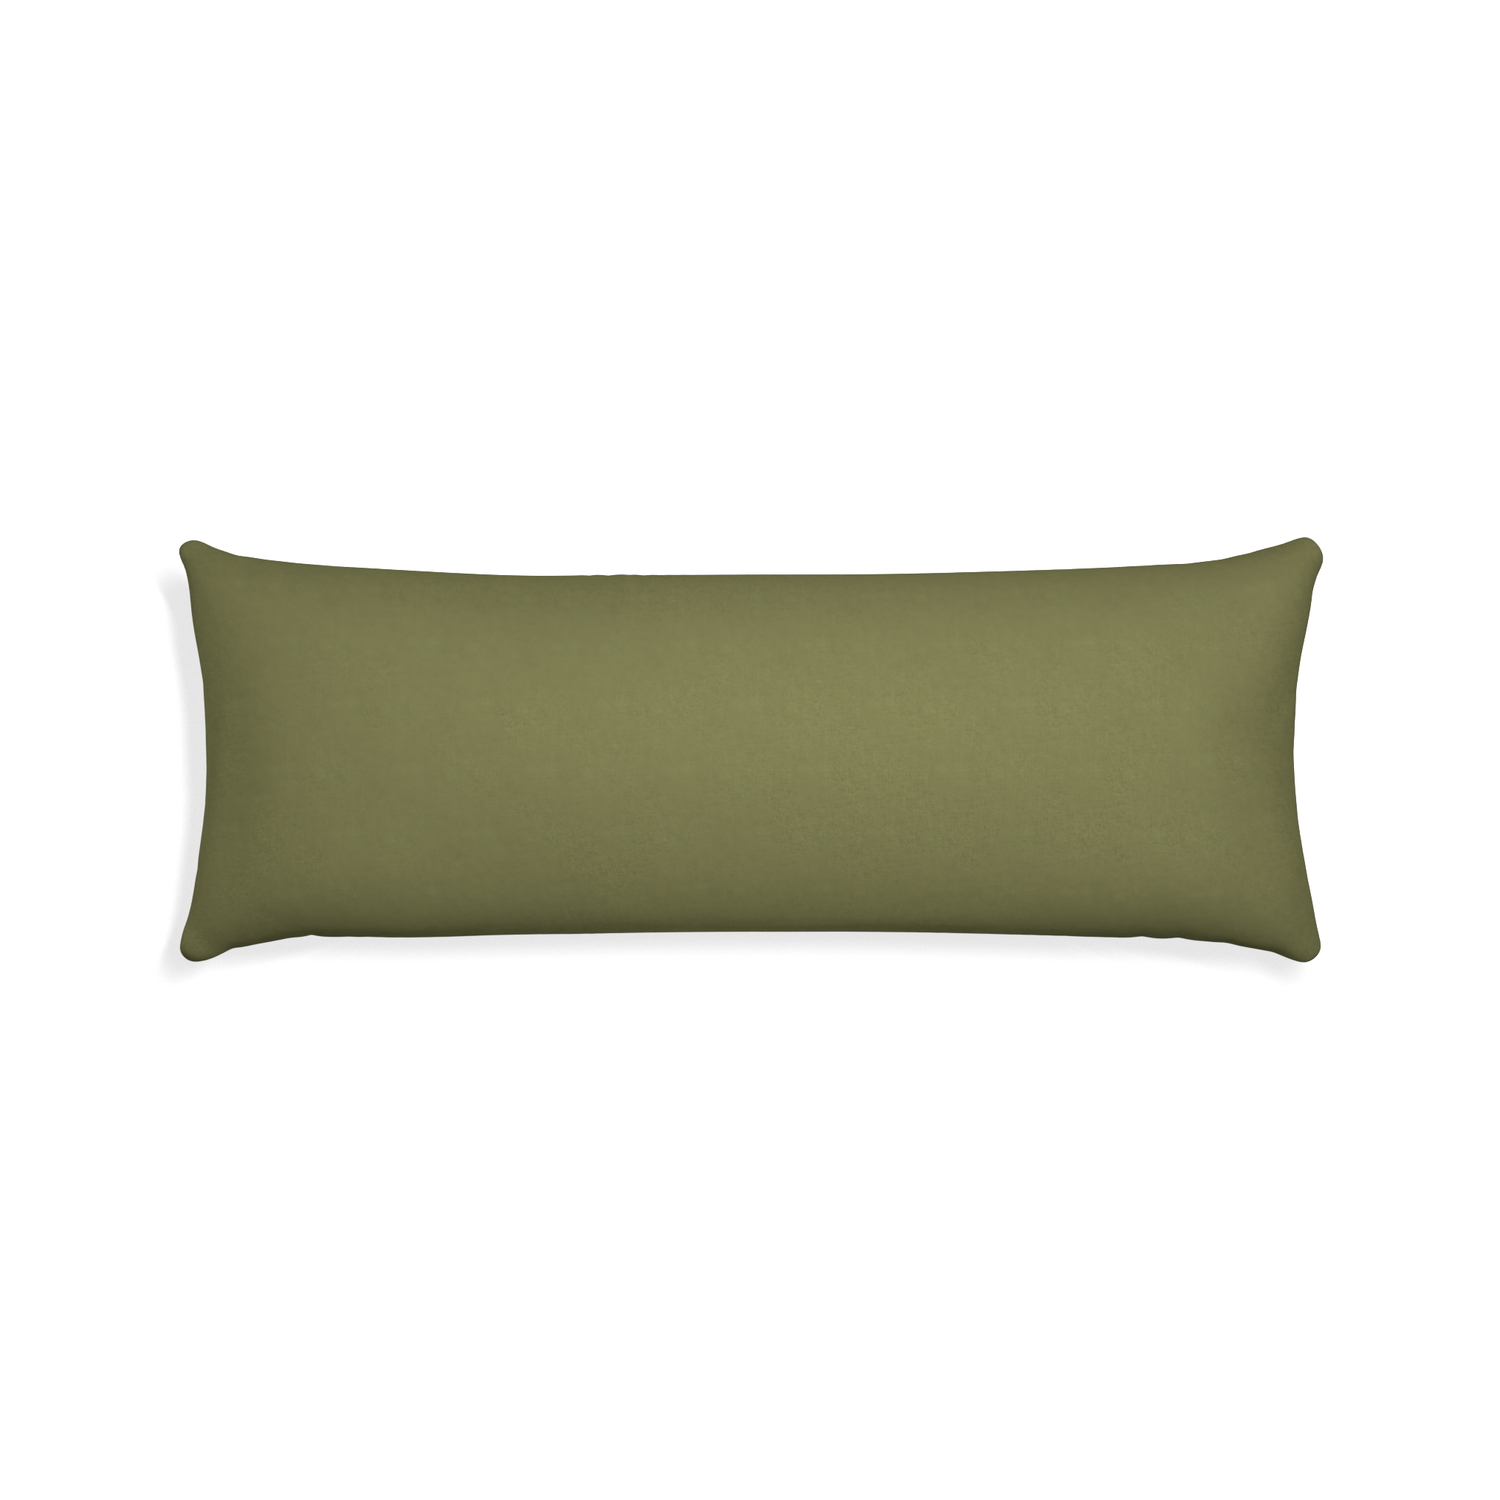 Xl-lumbar moss custom moss greenpillow with none on white background